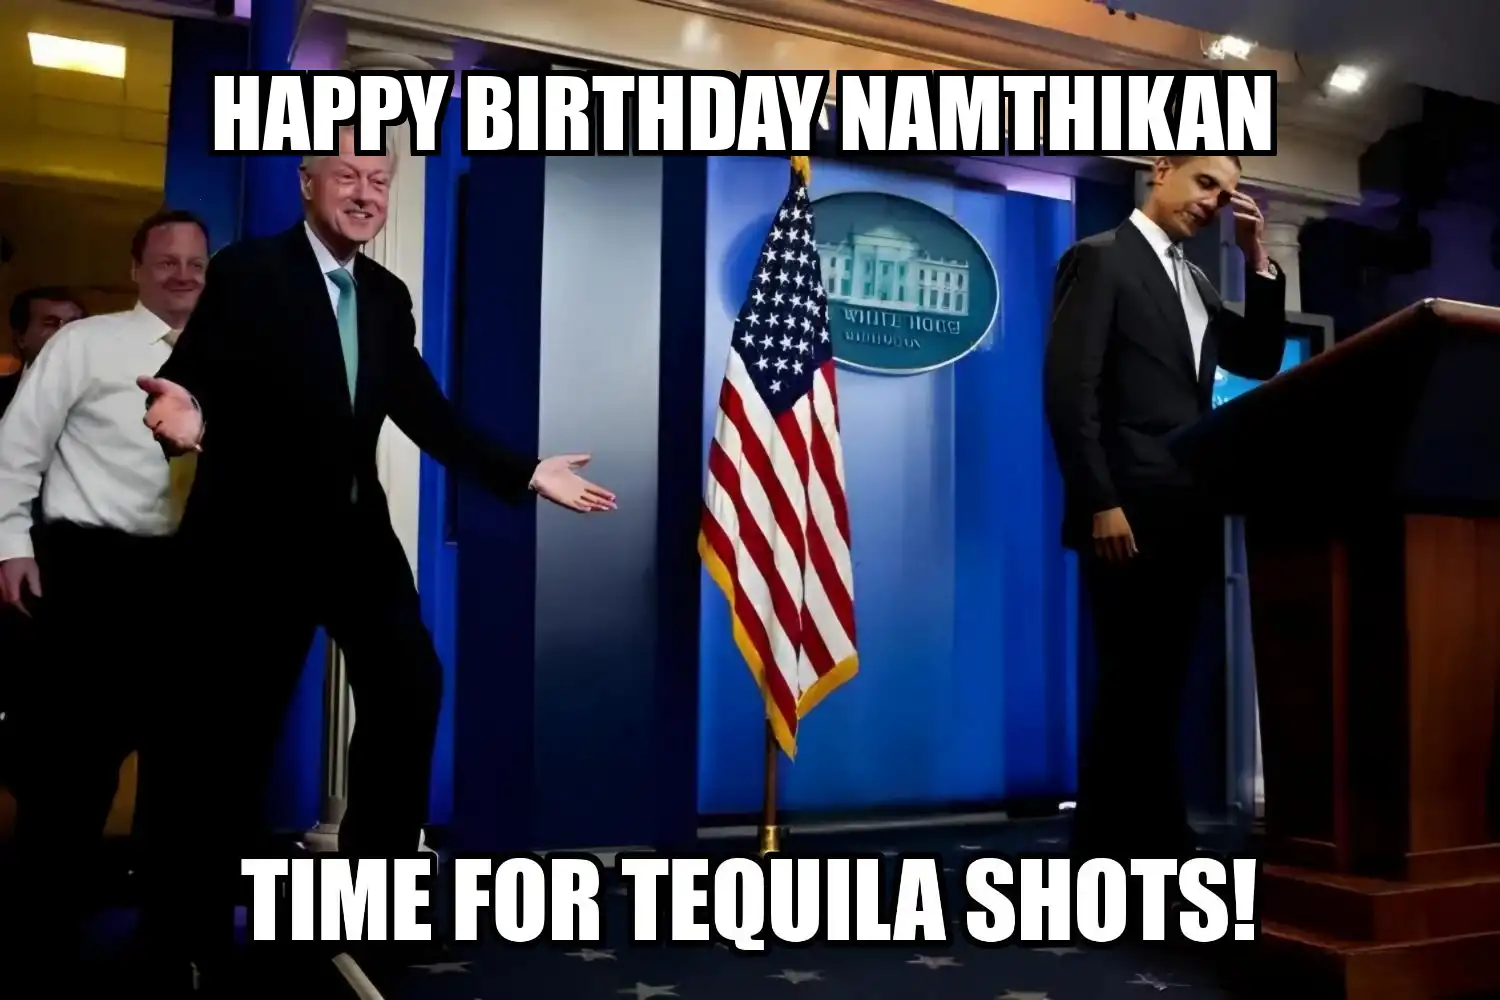 Happy Birthday Namthikan Time For Tequila Shots Memes